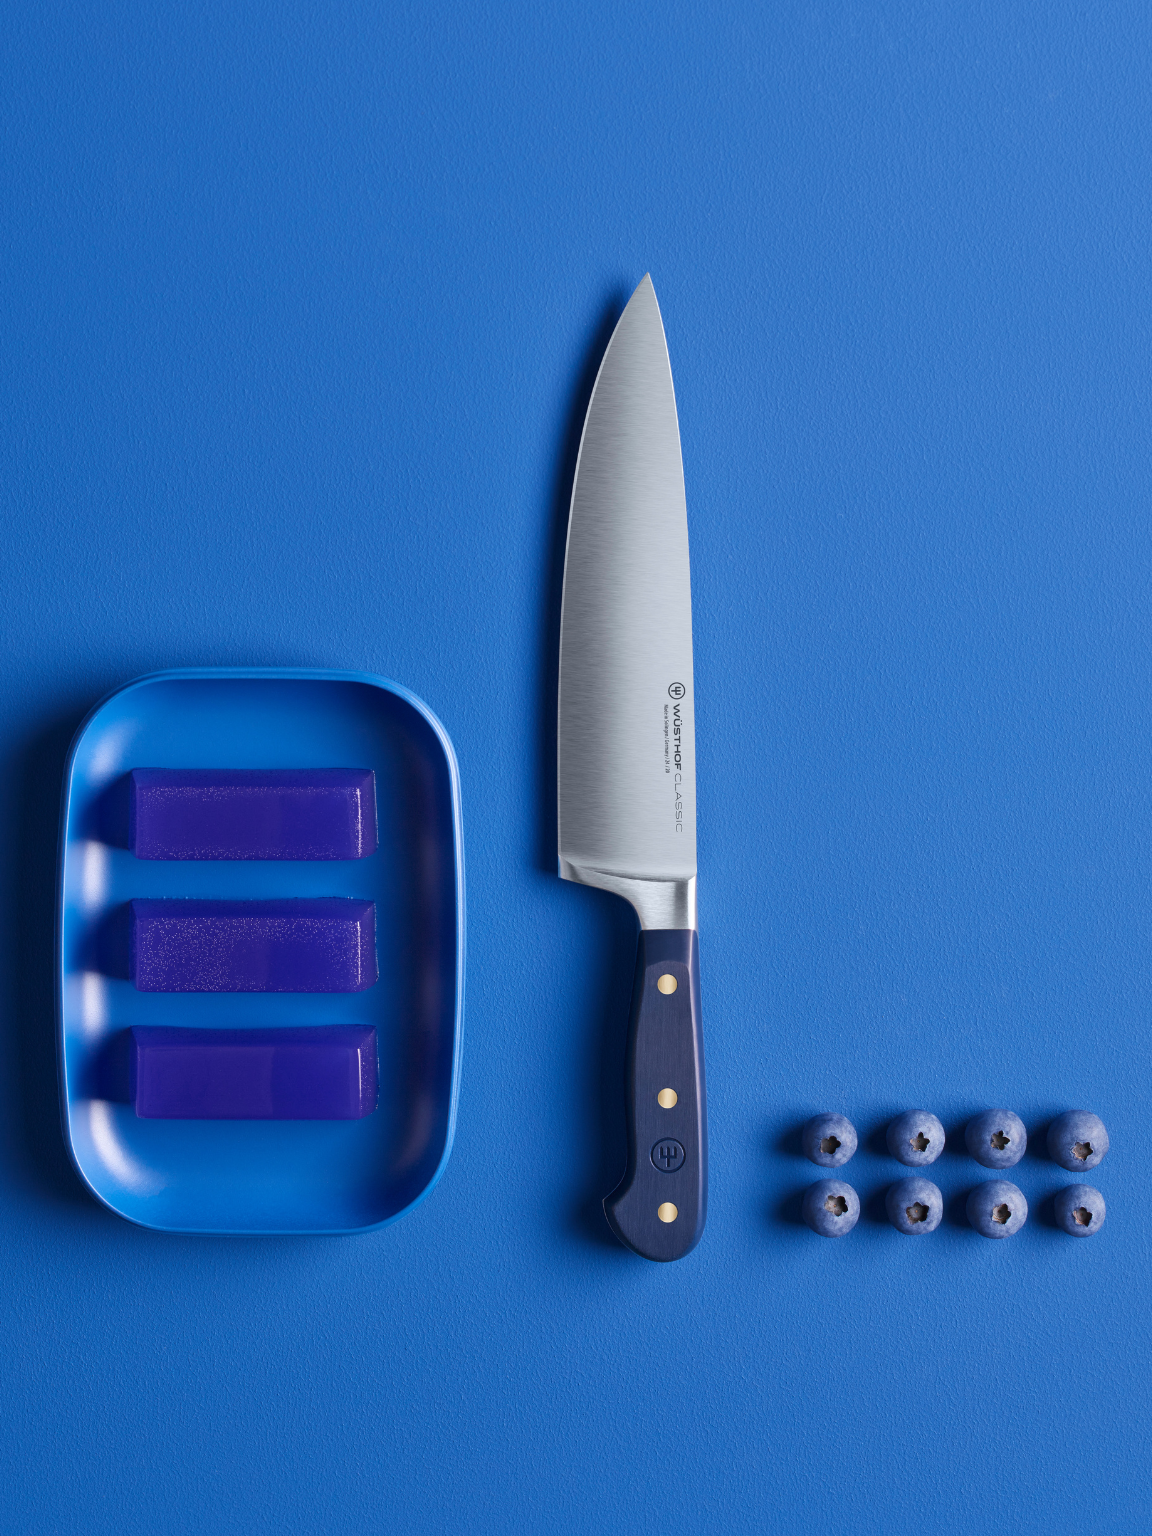 Chef's Knife in wild blueberry